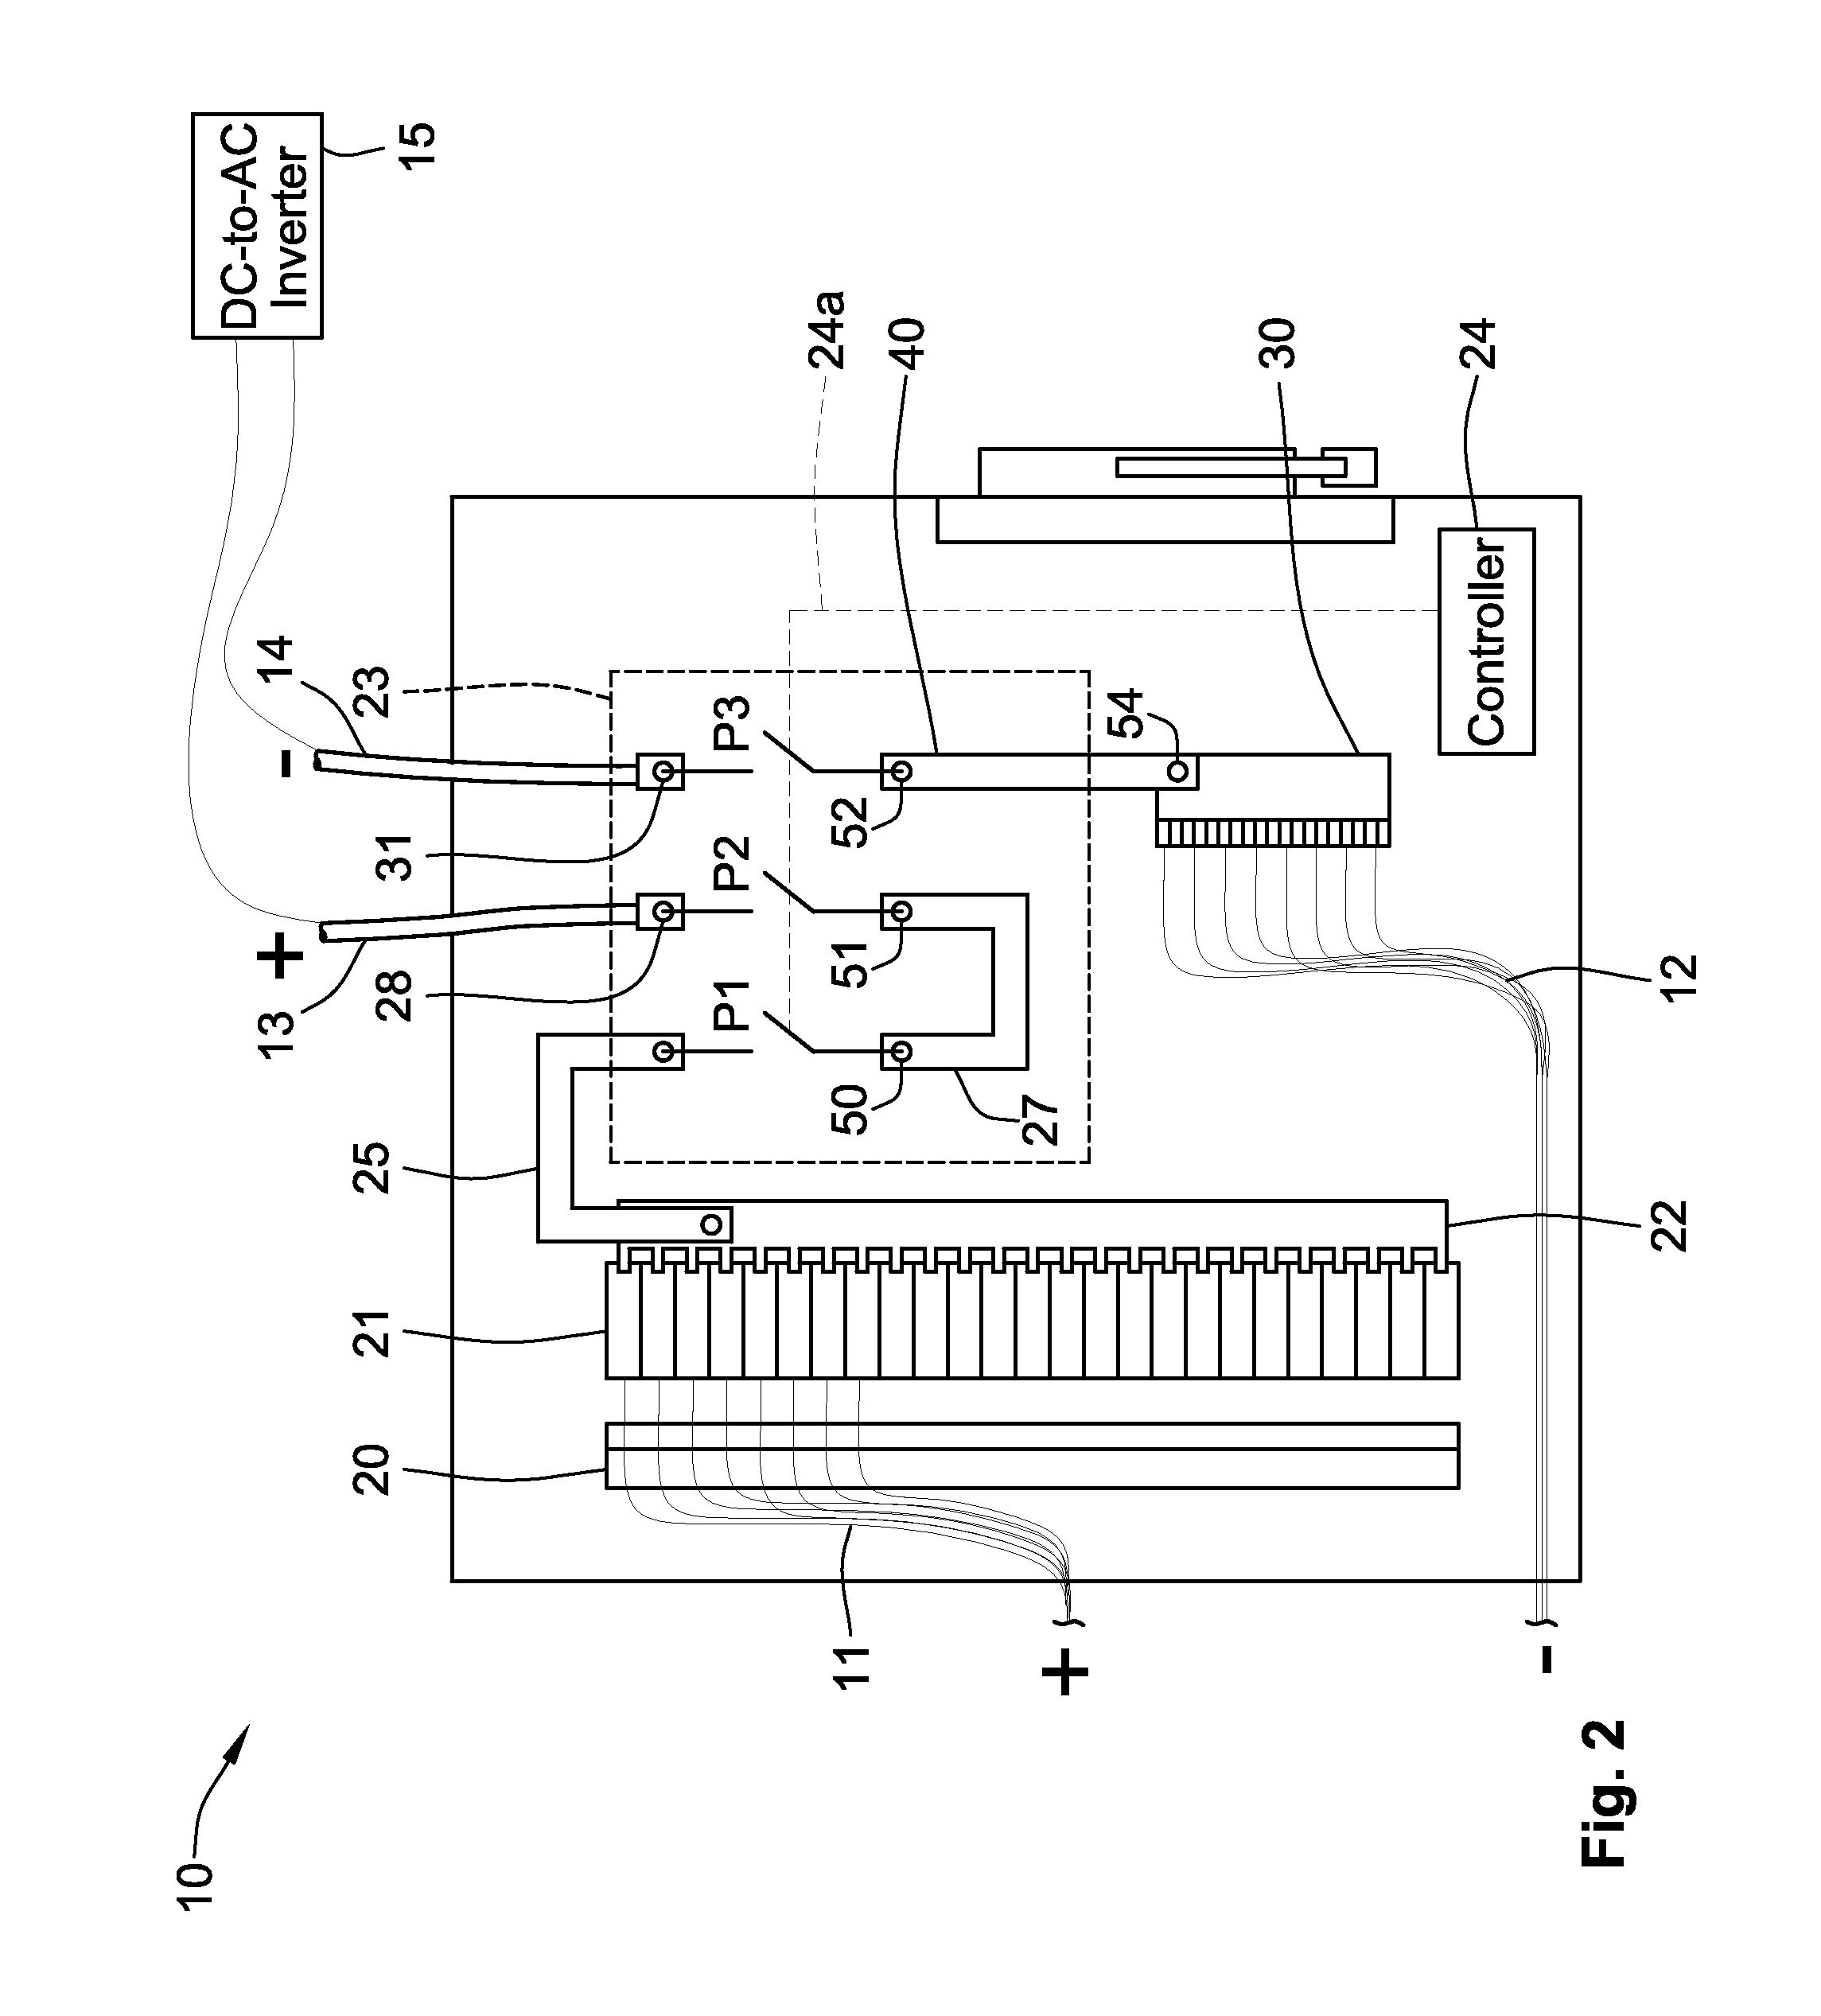 Photovoltaic string combiner with disconnect having provision for converting between grounded and ungrounded systems